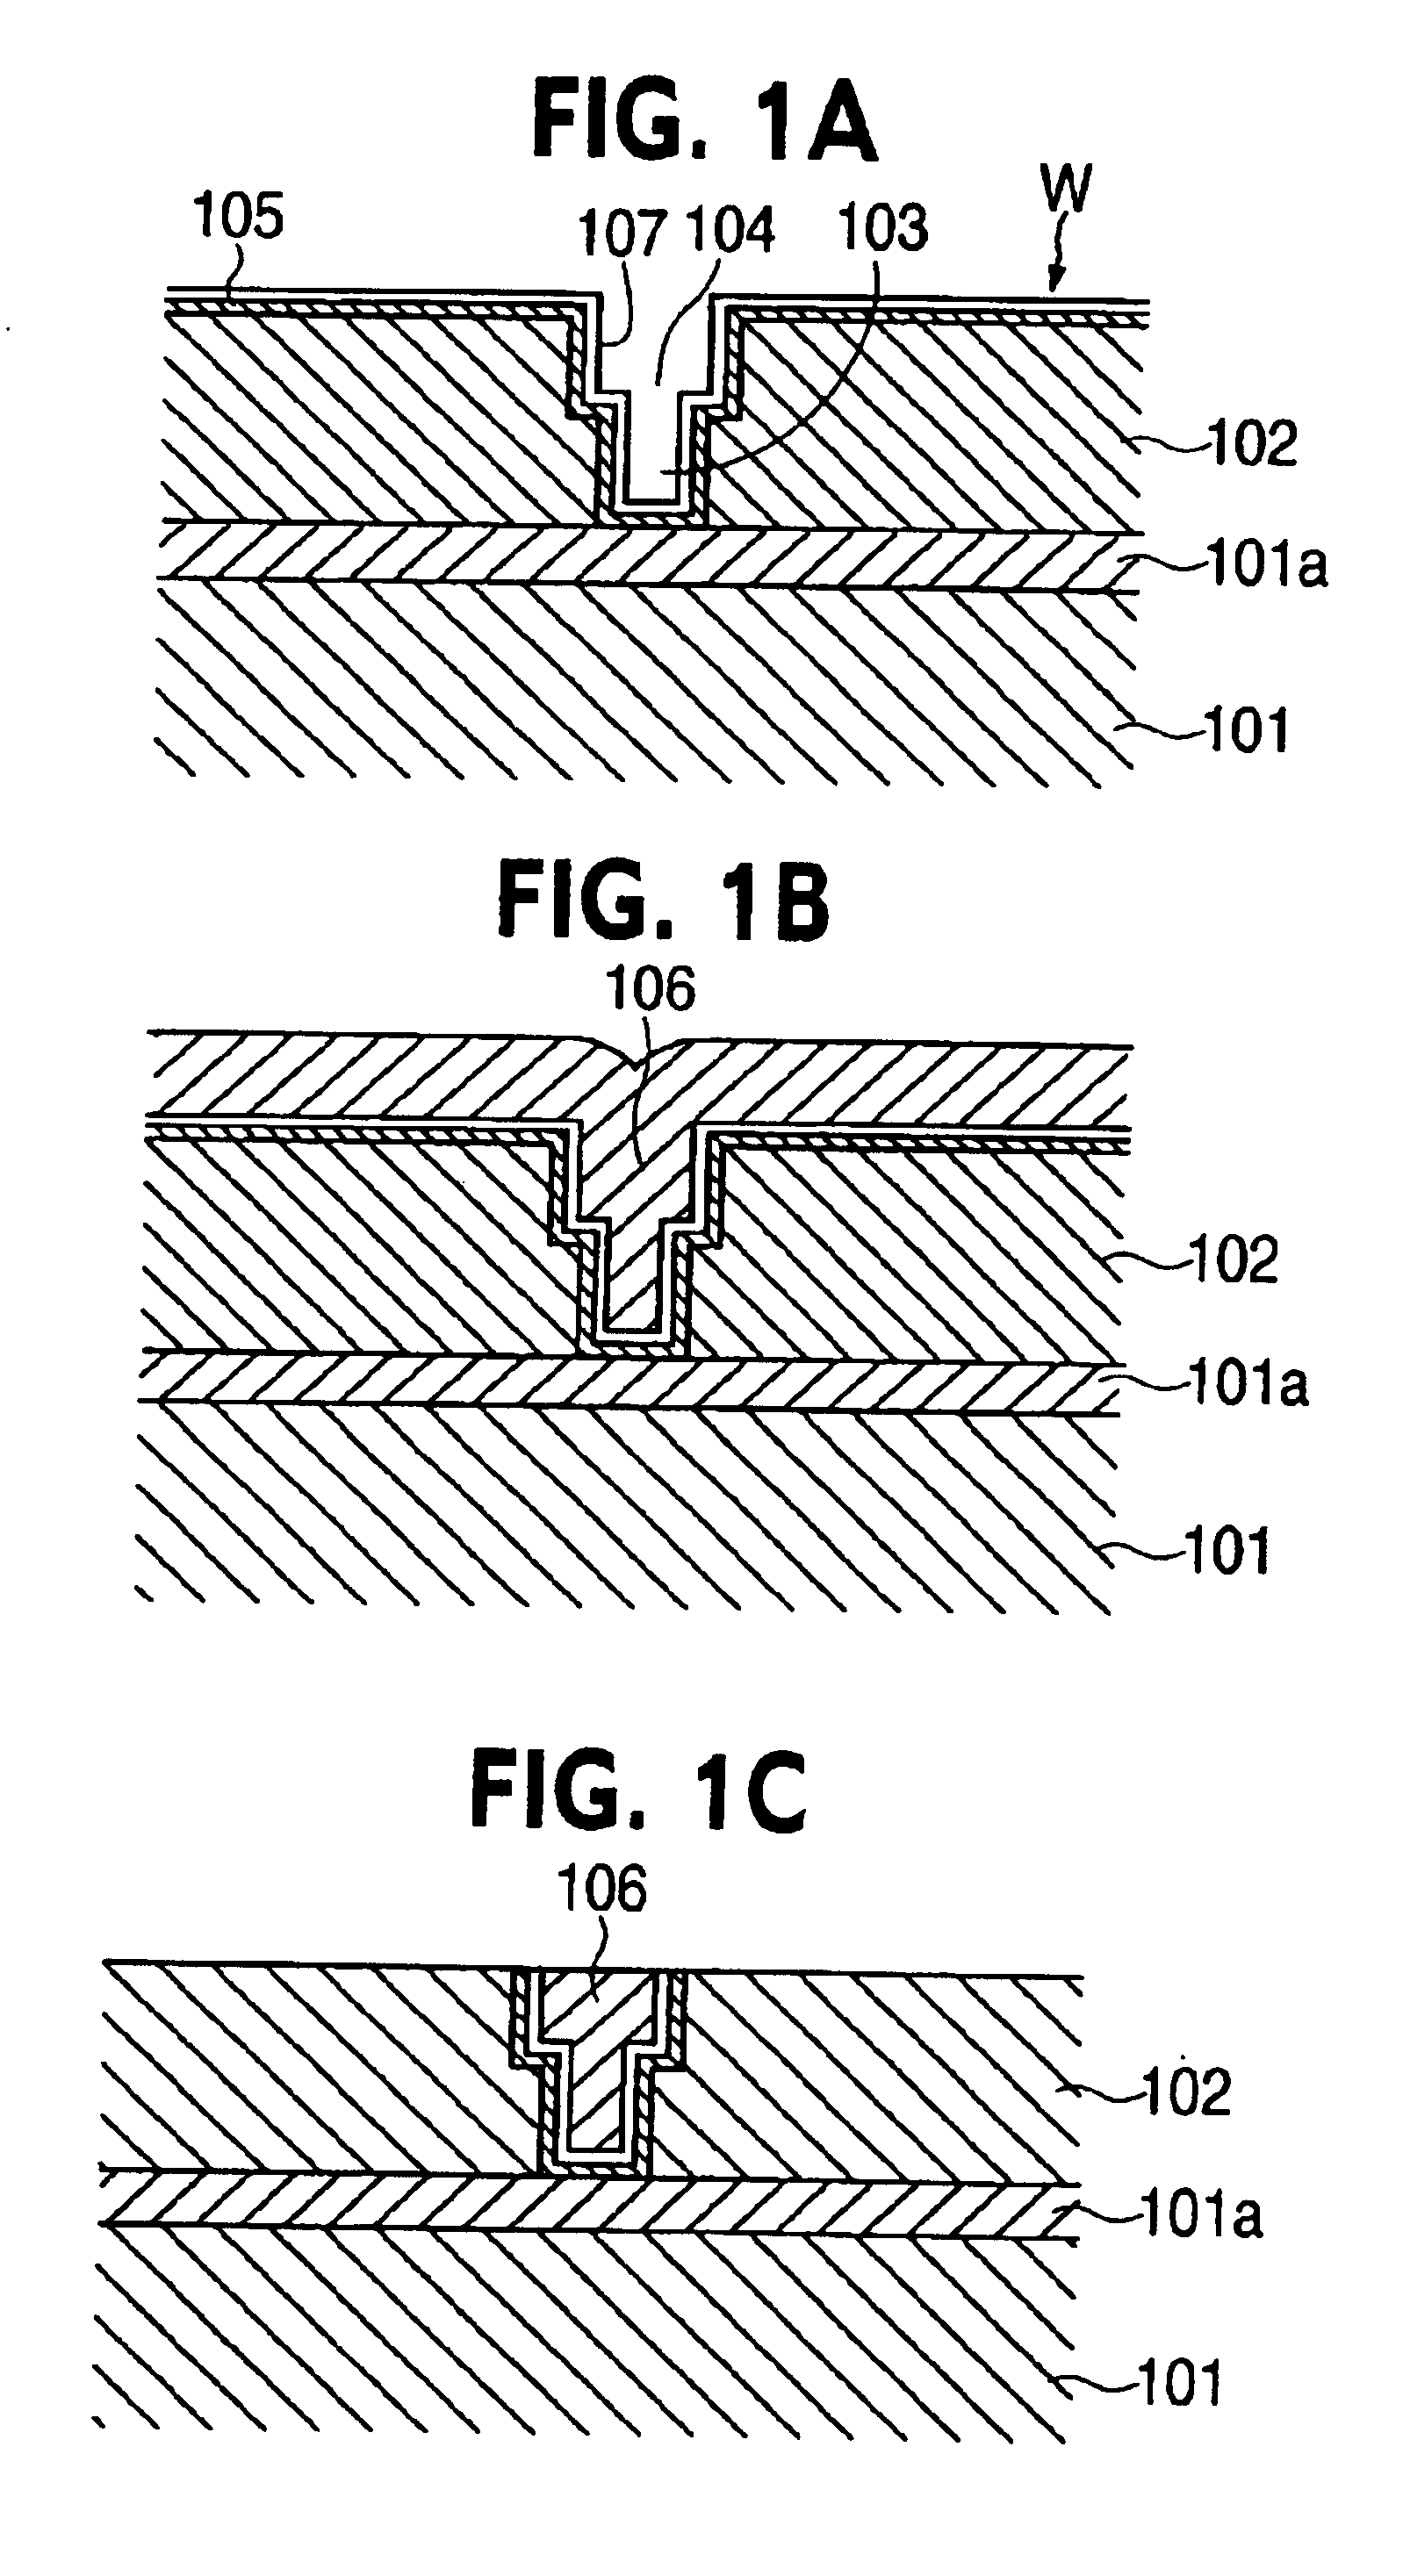 Revolution member supporting apparatus and semiconductor substrate processing apparatus